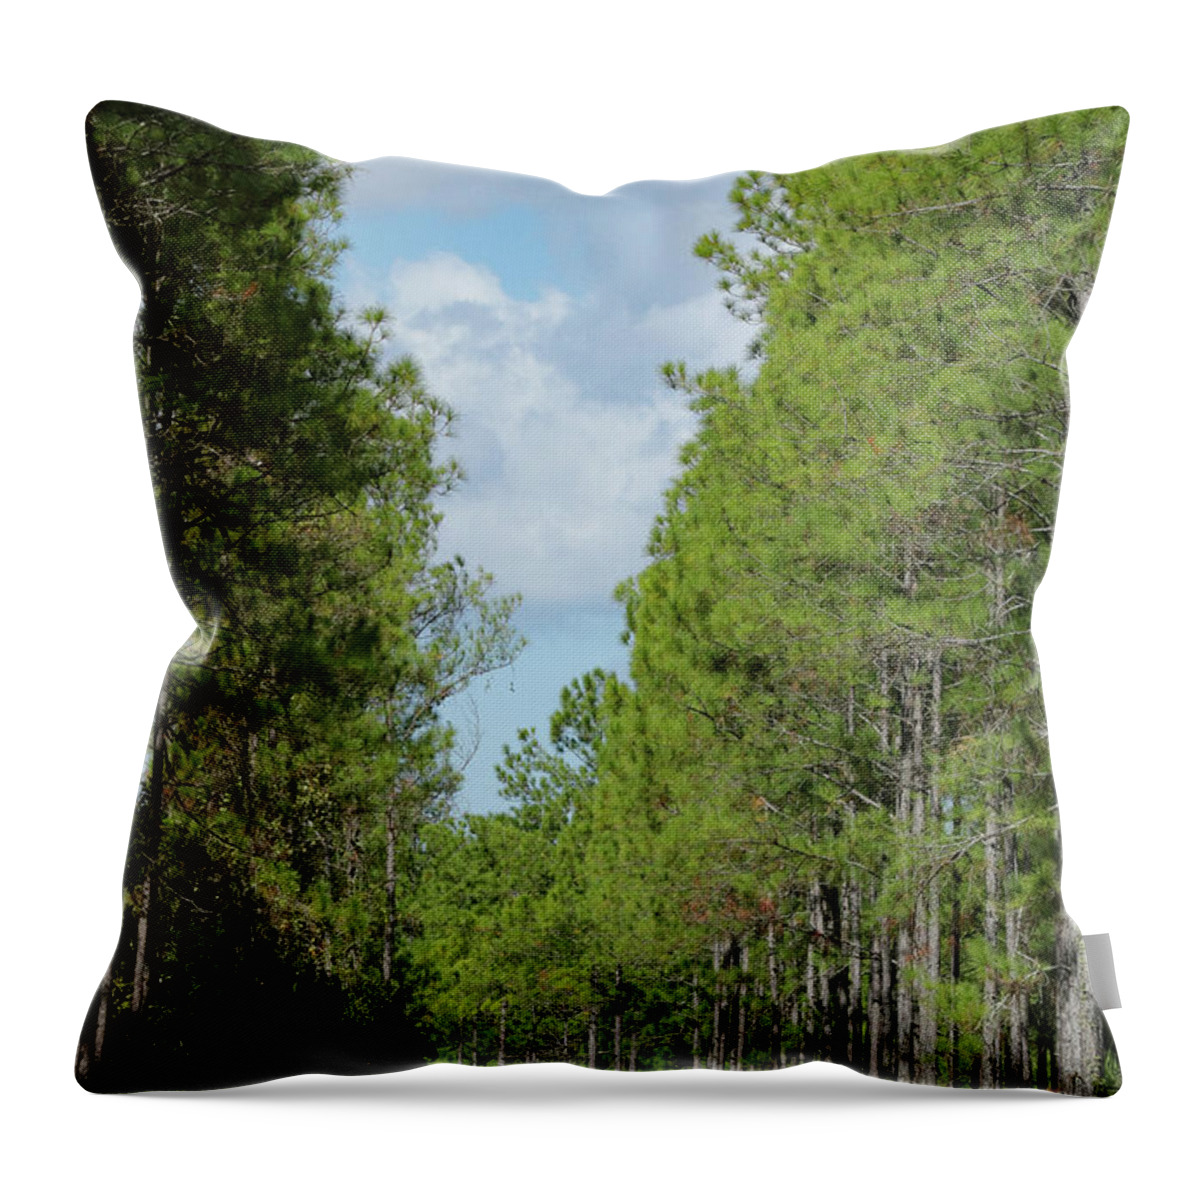 Bike Throw Pillow featuring the photograph Morning Ride by Rick Redman